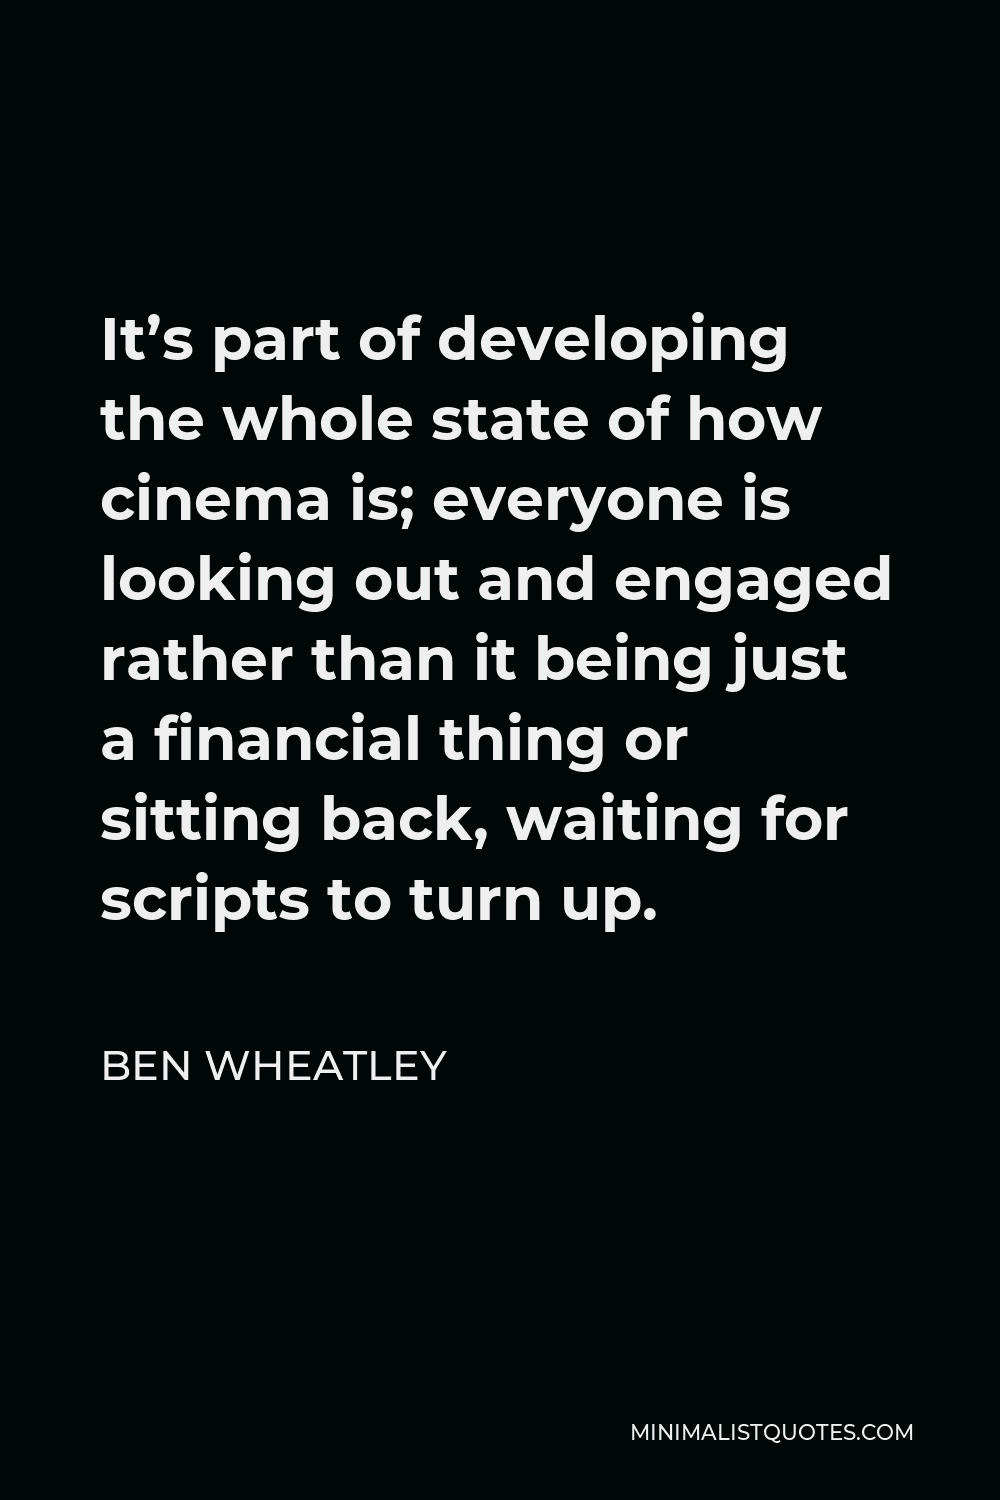 Ben Wheatley Quote - It’s part of developing the whole state of how cinema is; everyone is looking out and engaged rather than it being just a financial thing or sitting back, waiting for scripts to turn up.